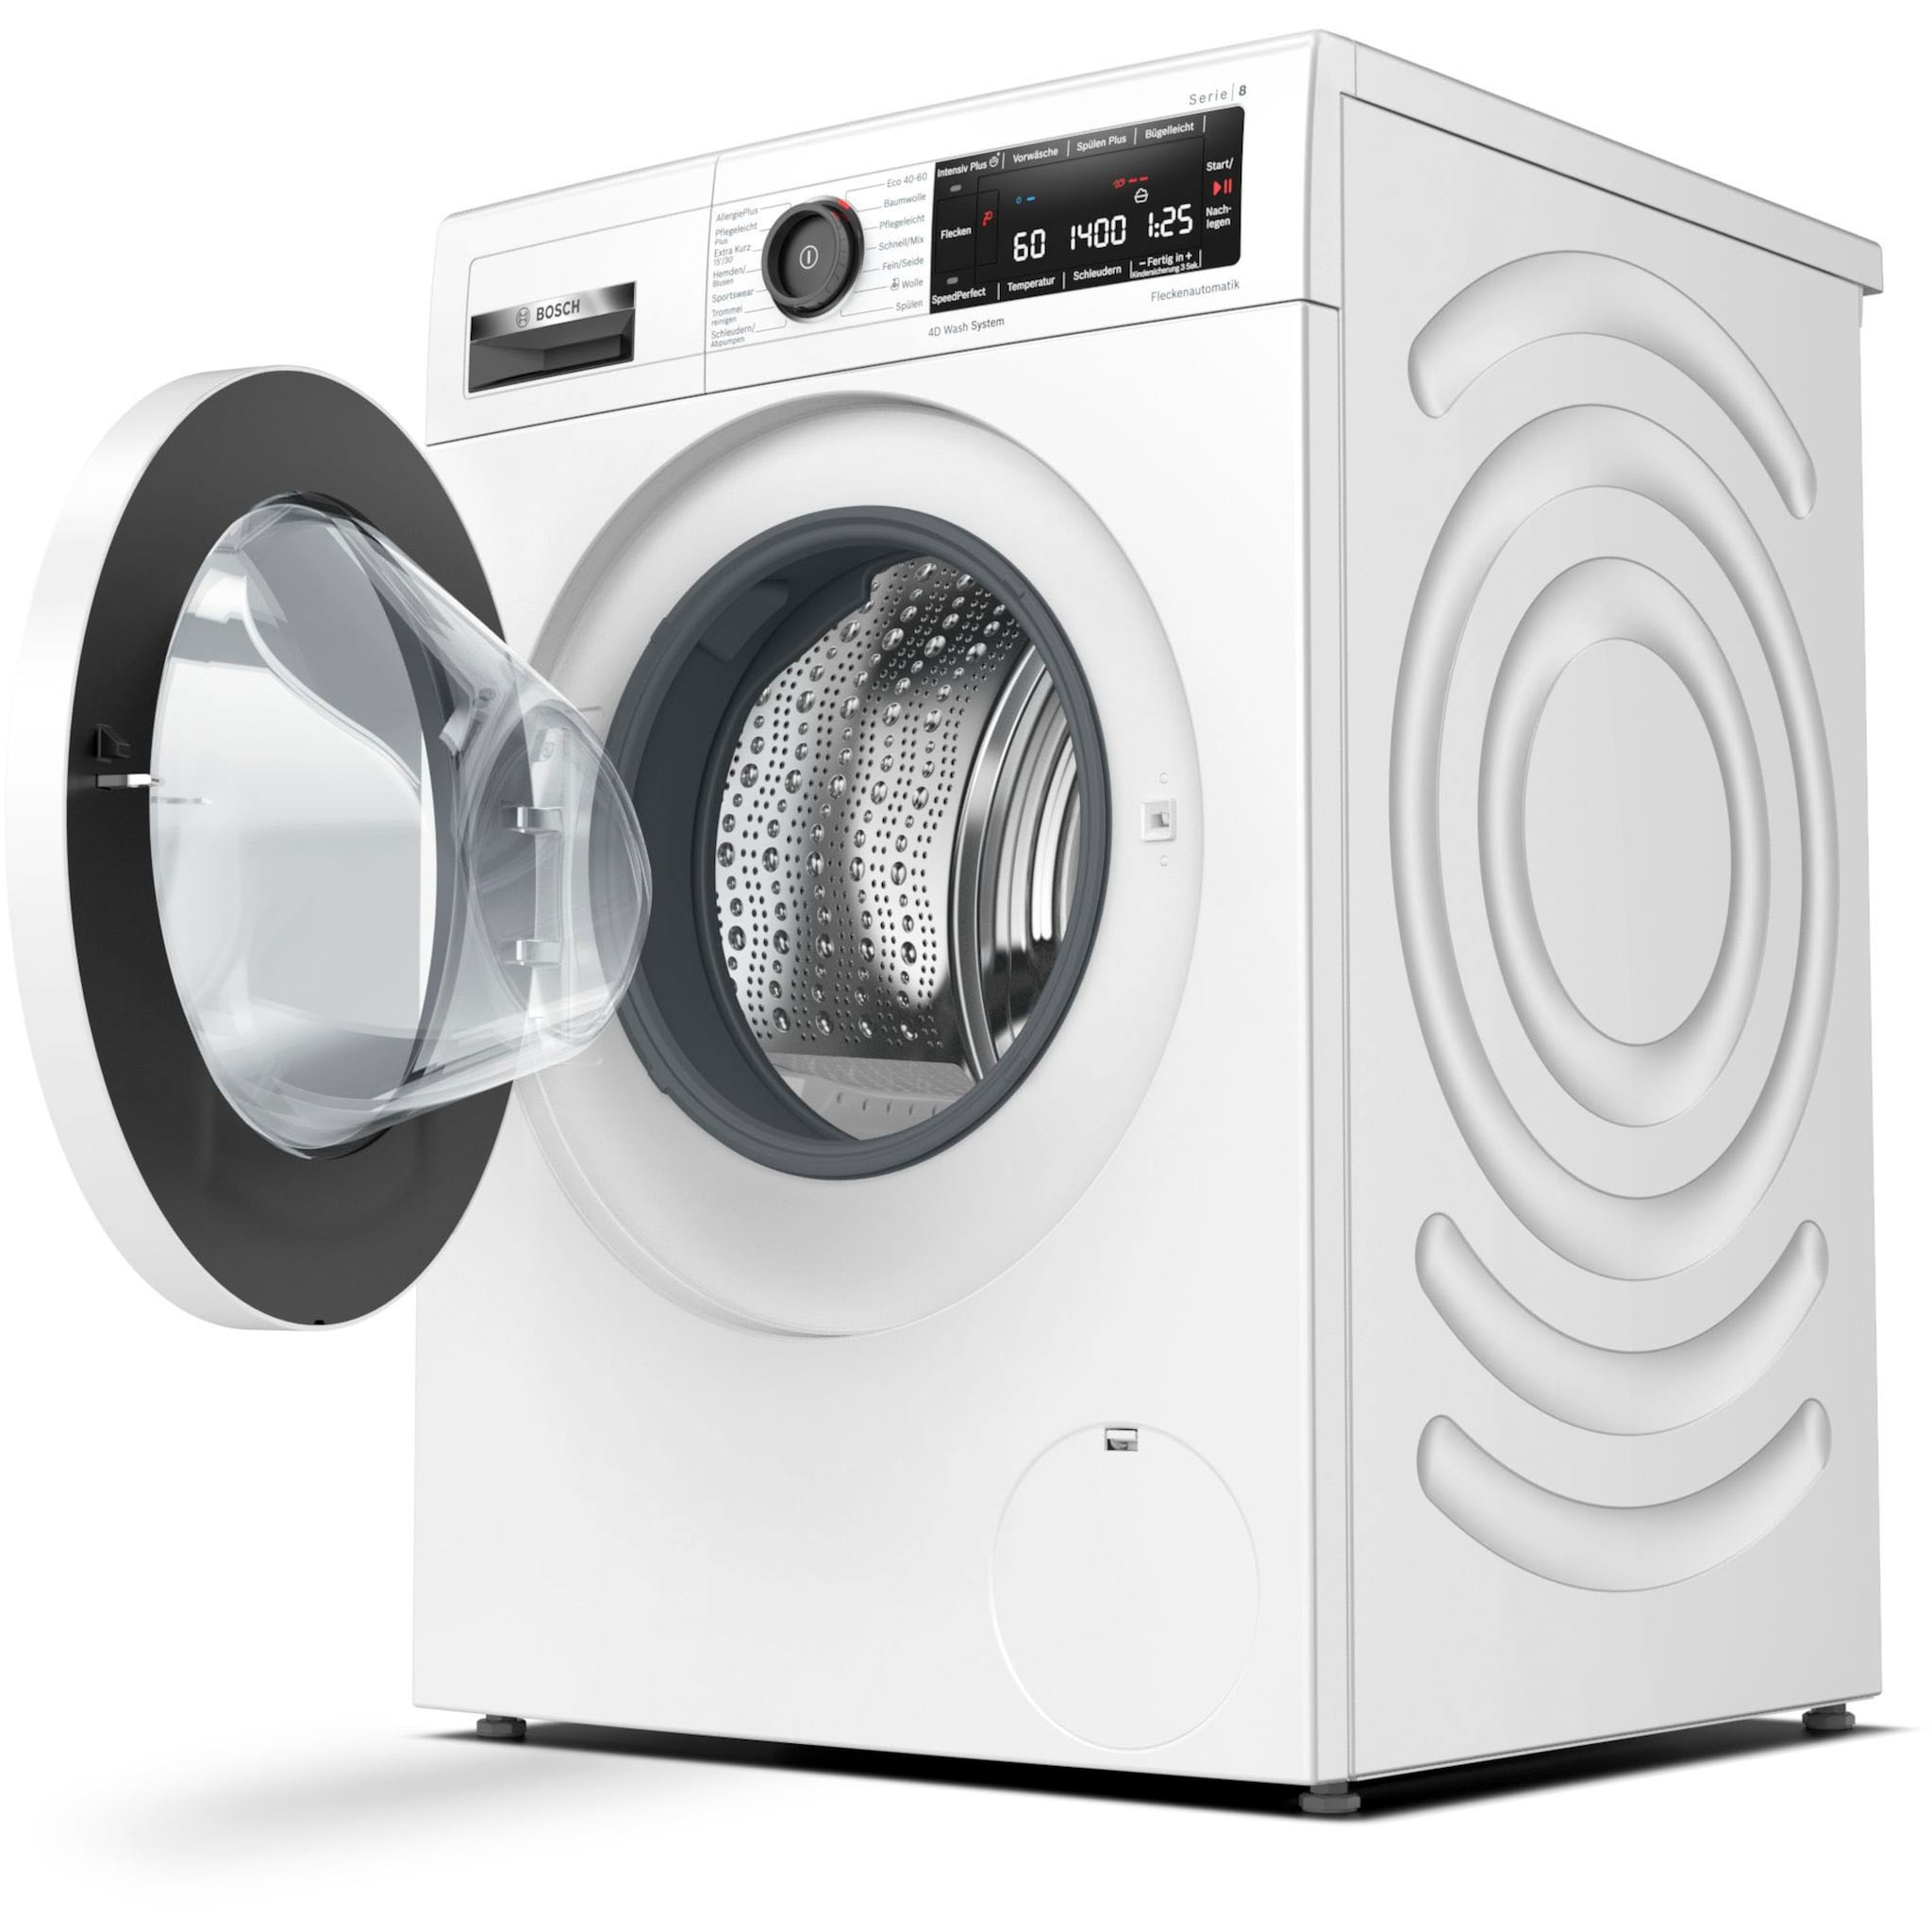 Bosch wasmachine kg - Trading Witgoed Outlet